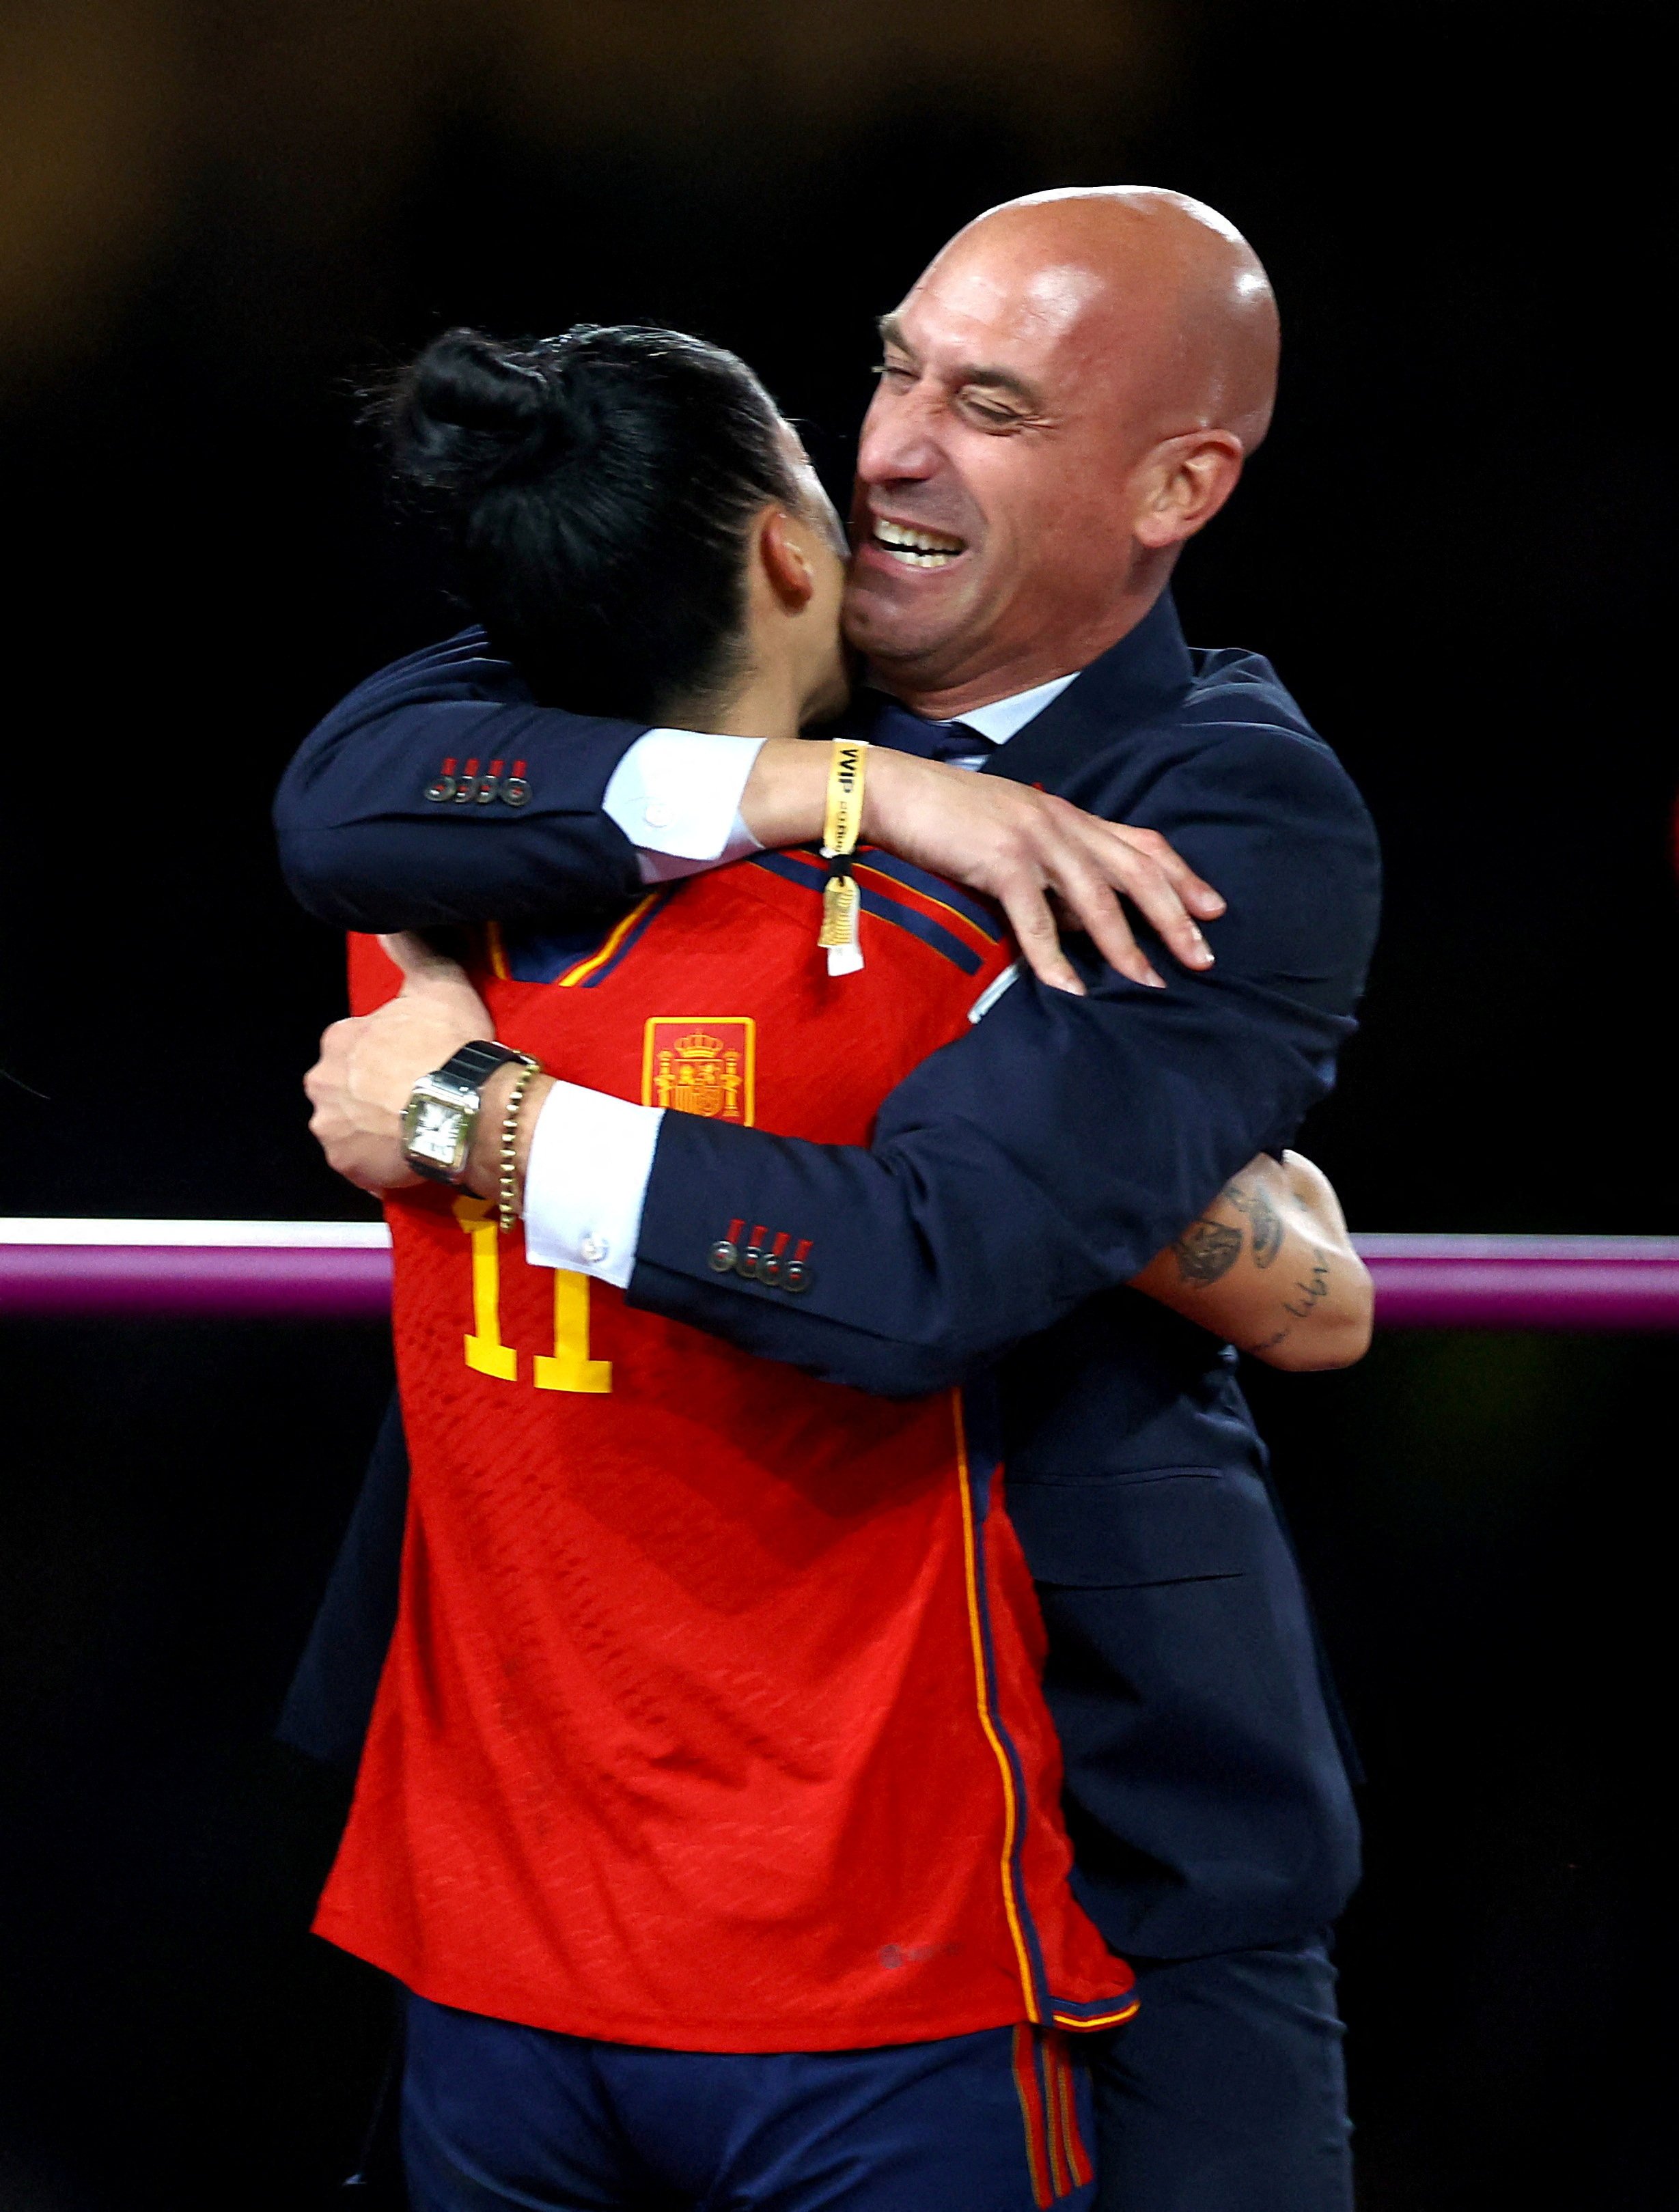 Spanish football chief Luis Rubiales has been criticised for kissing Spain player Jenni Hermoso after her side’s World Cup victory. Photo: Reuters